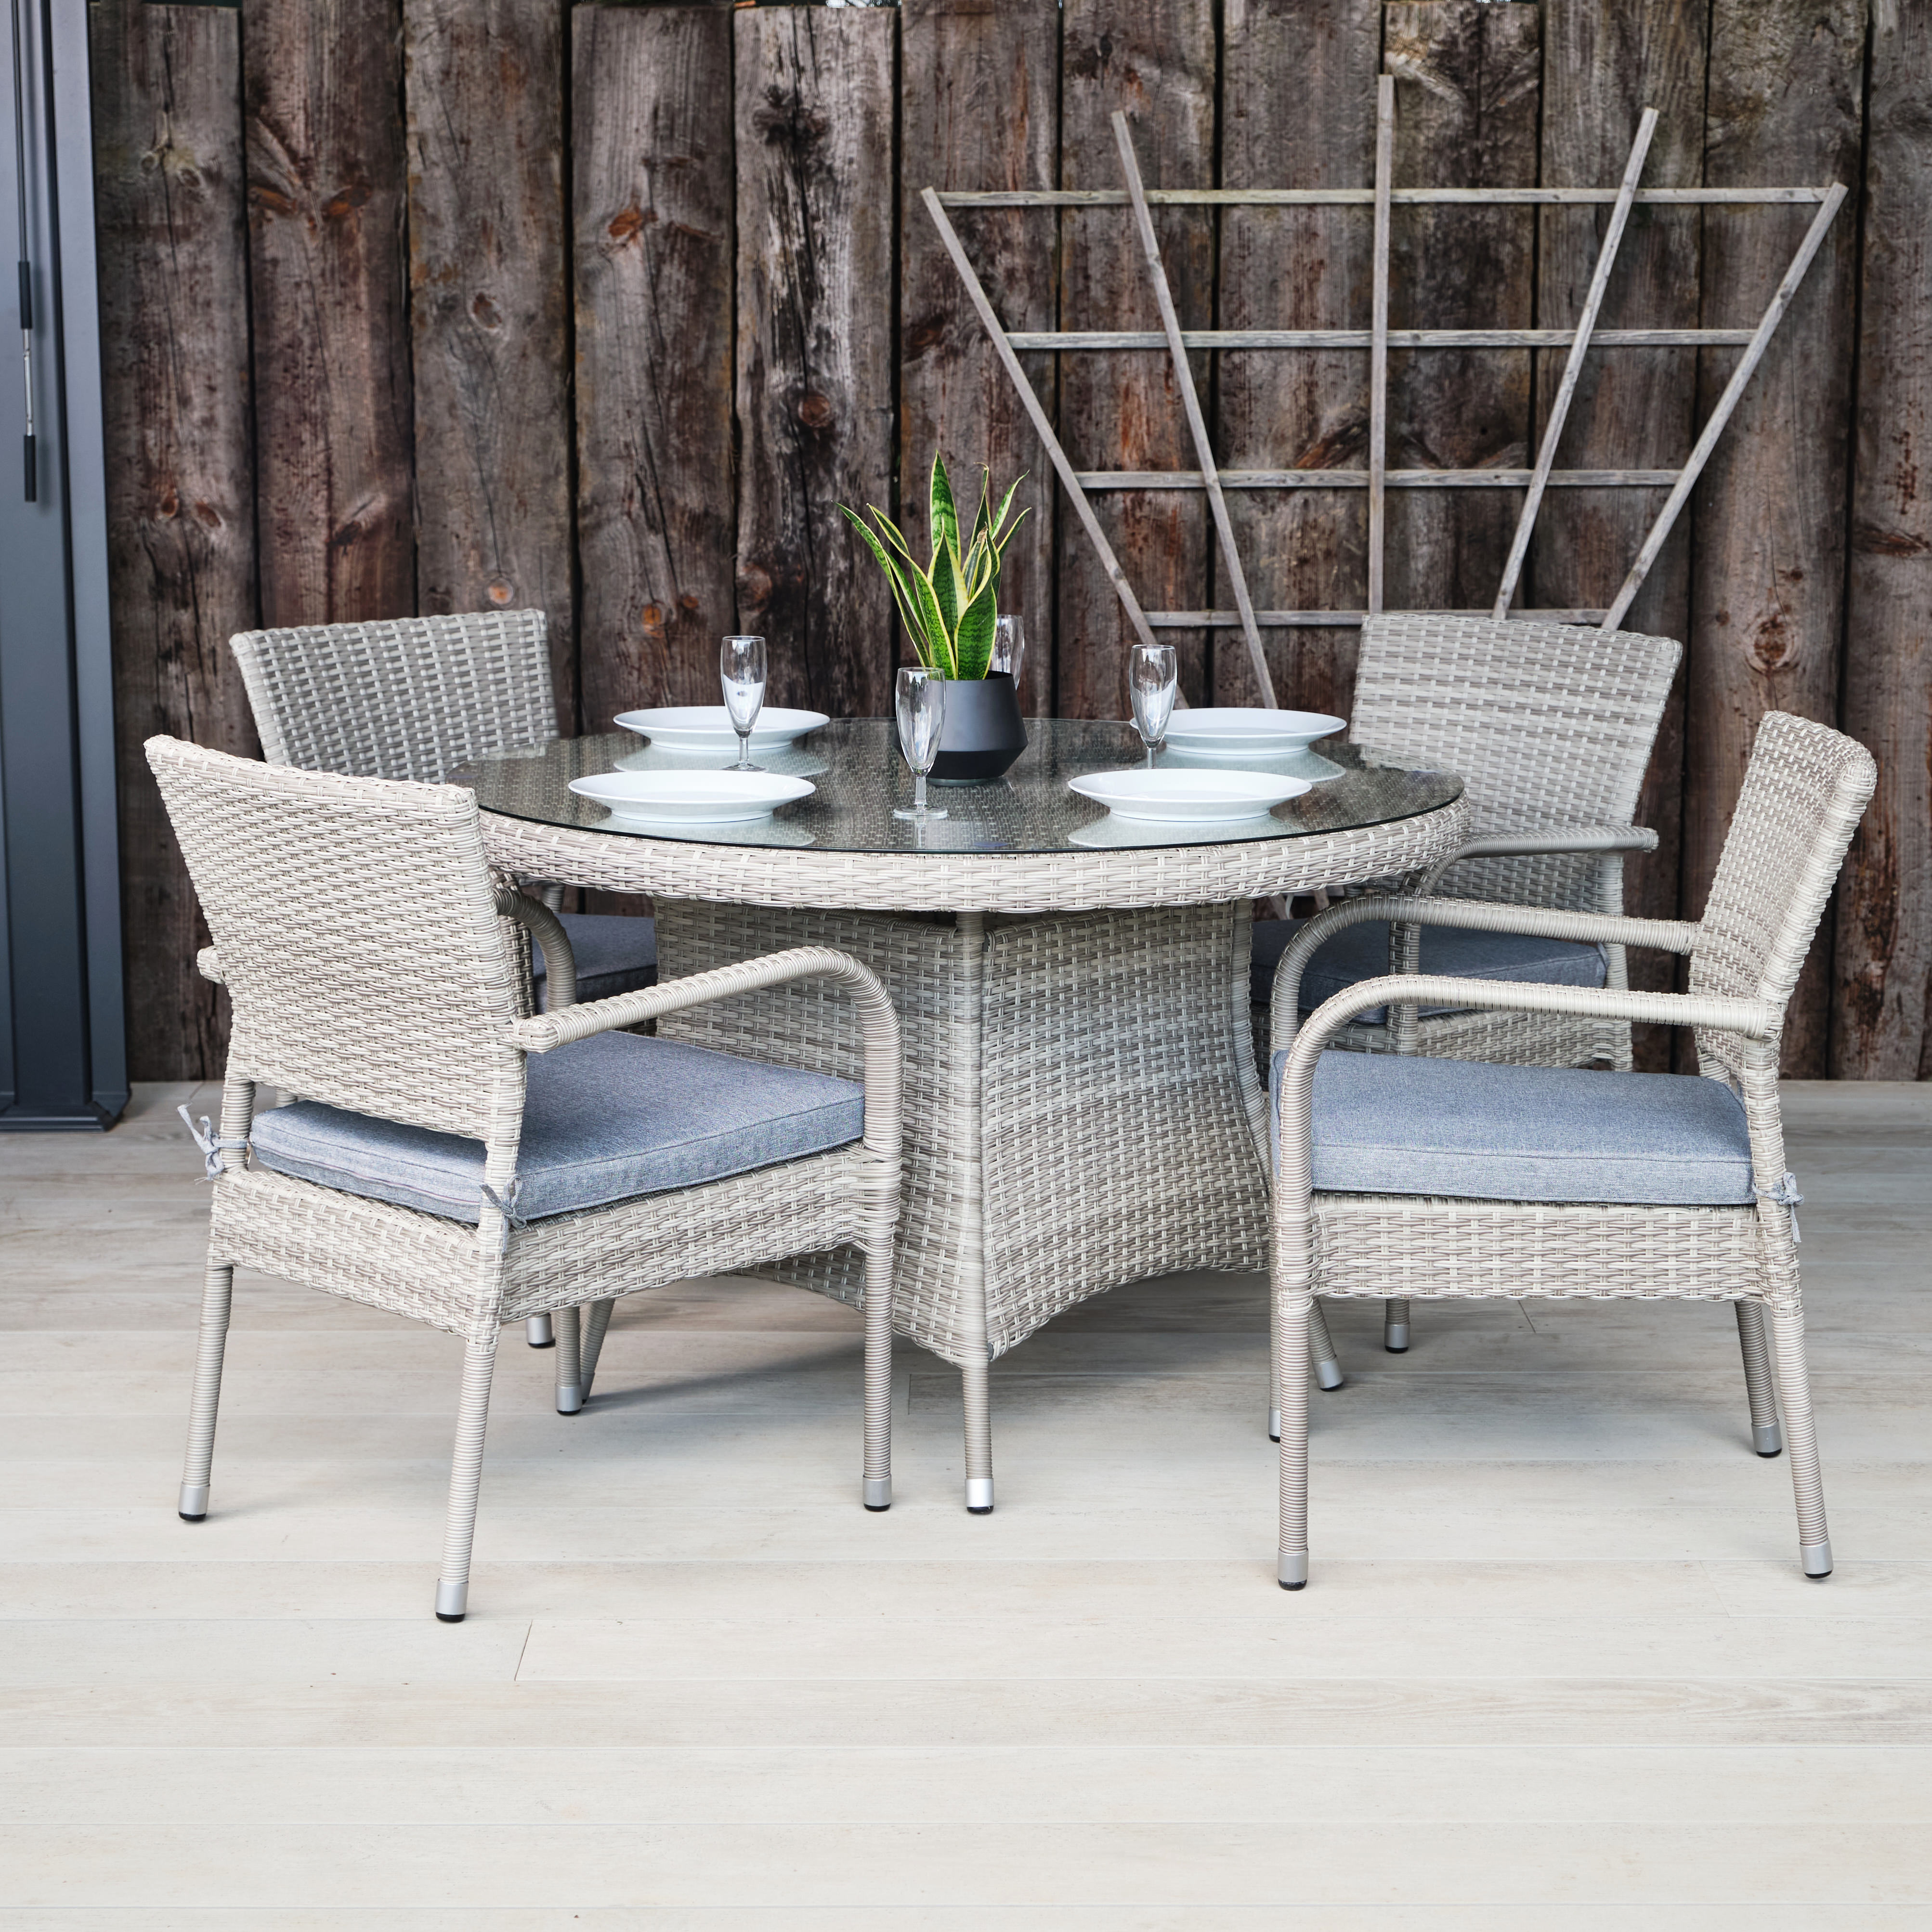 Grey rattan outdoor dining table and 4 chairs Clovelly range - Woodberry